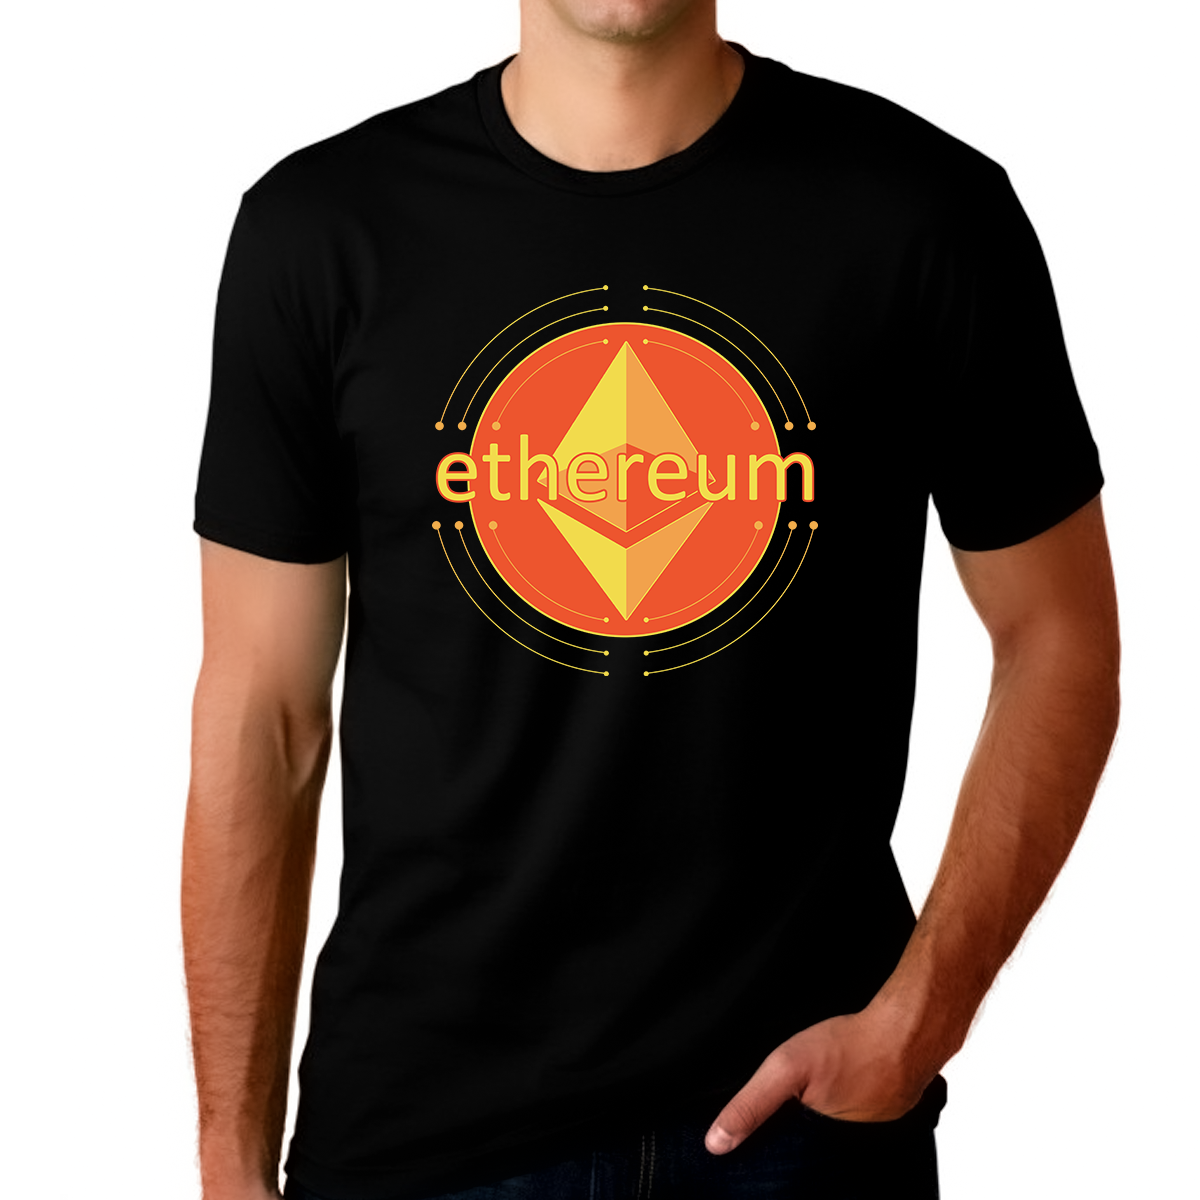 Crypto Shirt for Men Crypto Gifts Ethereum Shirt Cryptocurrency Crypto Shirt Crypto Ethereum Shirt